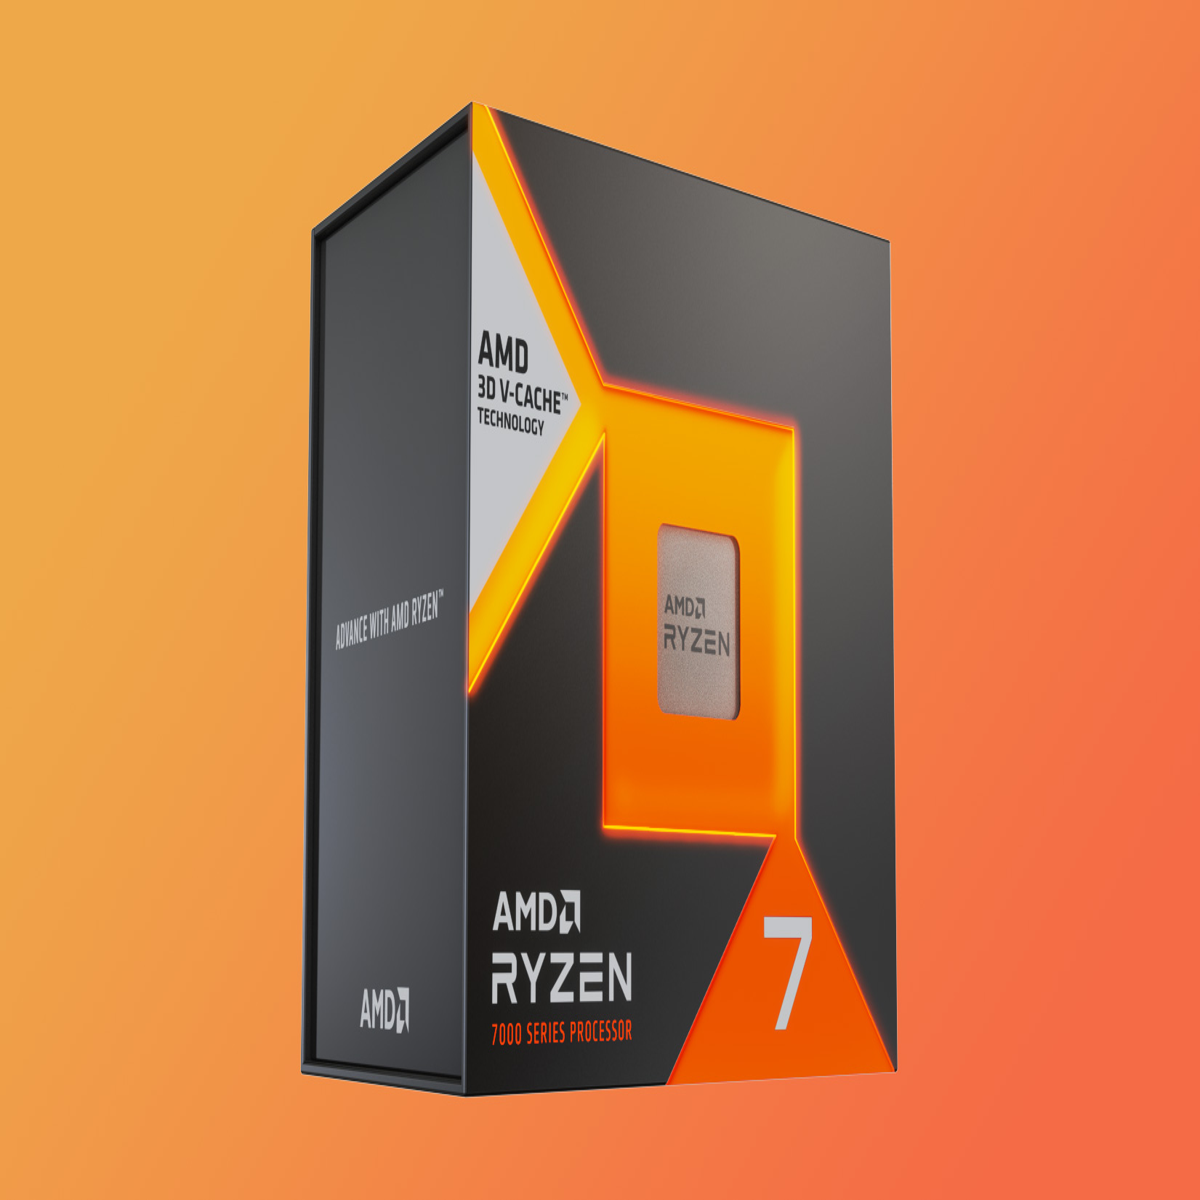 AMD Ryzen 7 7800X3D review: faster than 13900K and 7950X3D for gaming?